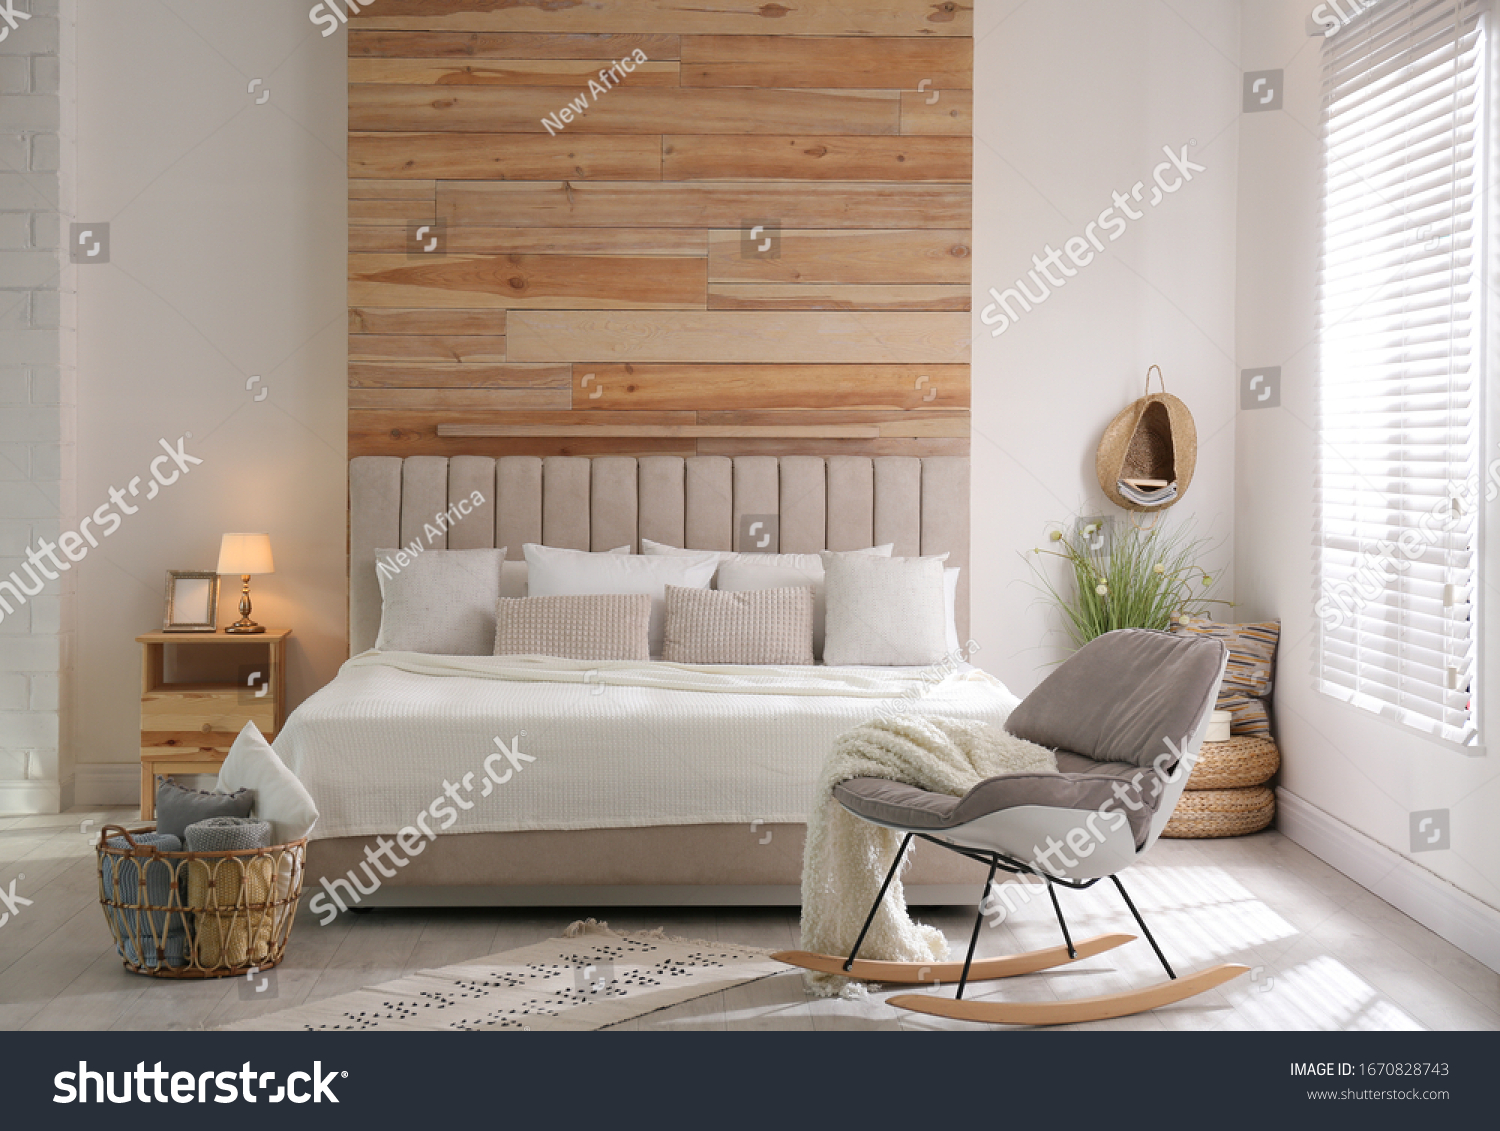 Stylish room interior with big comfortable bed #1670828743